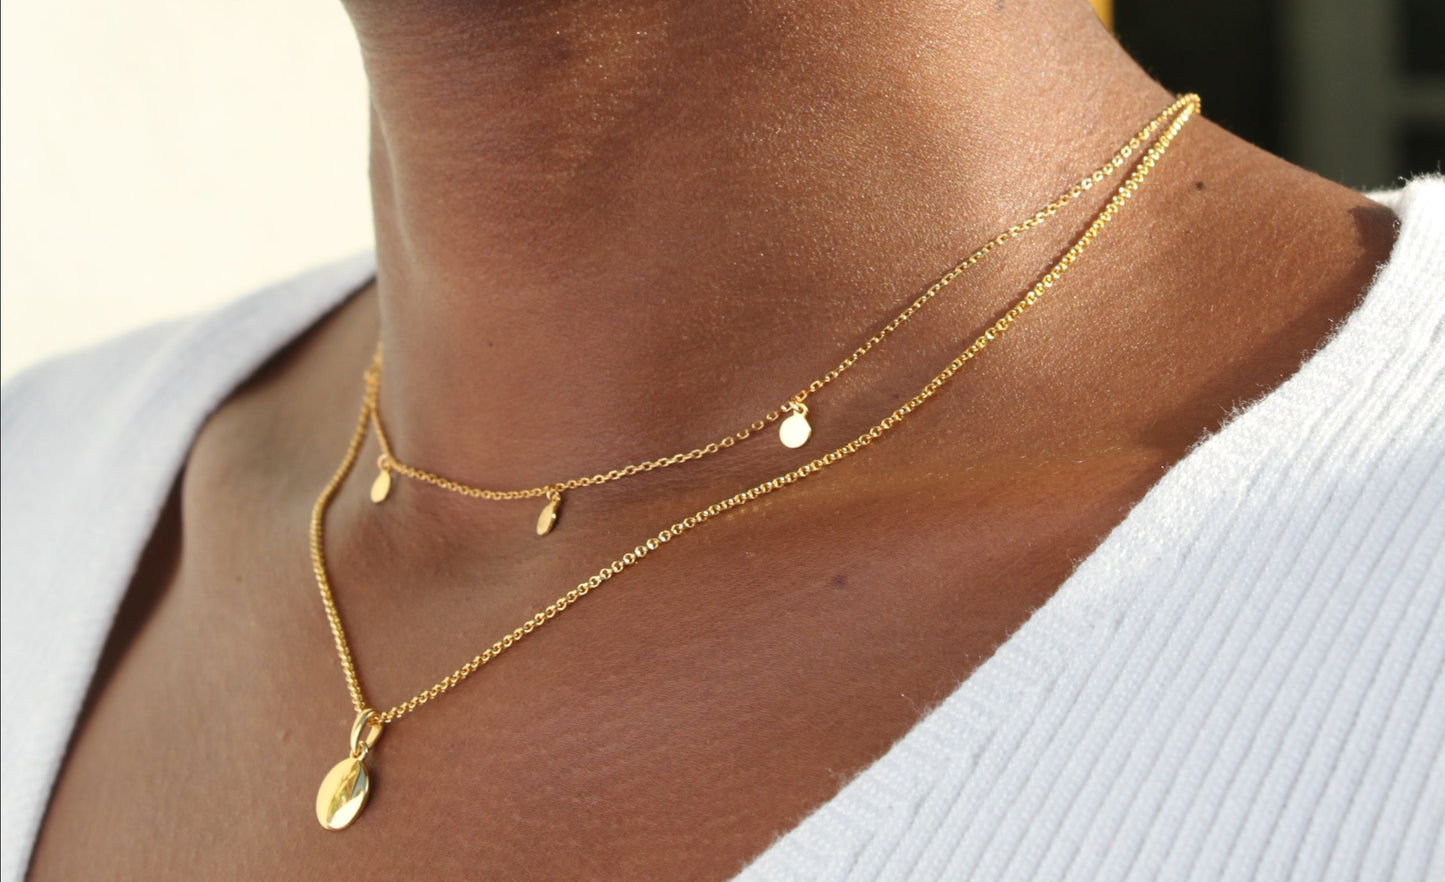 Bijoux Disc Necklace - Gold Plated - sterling silver. 18" ECO Chain Necklace